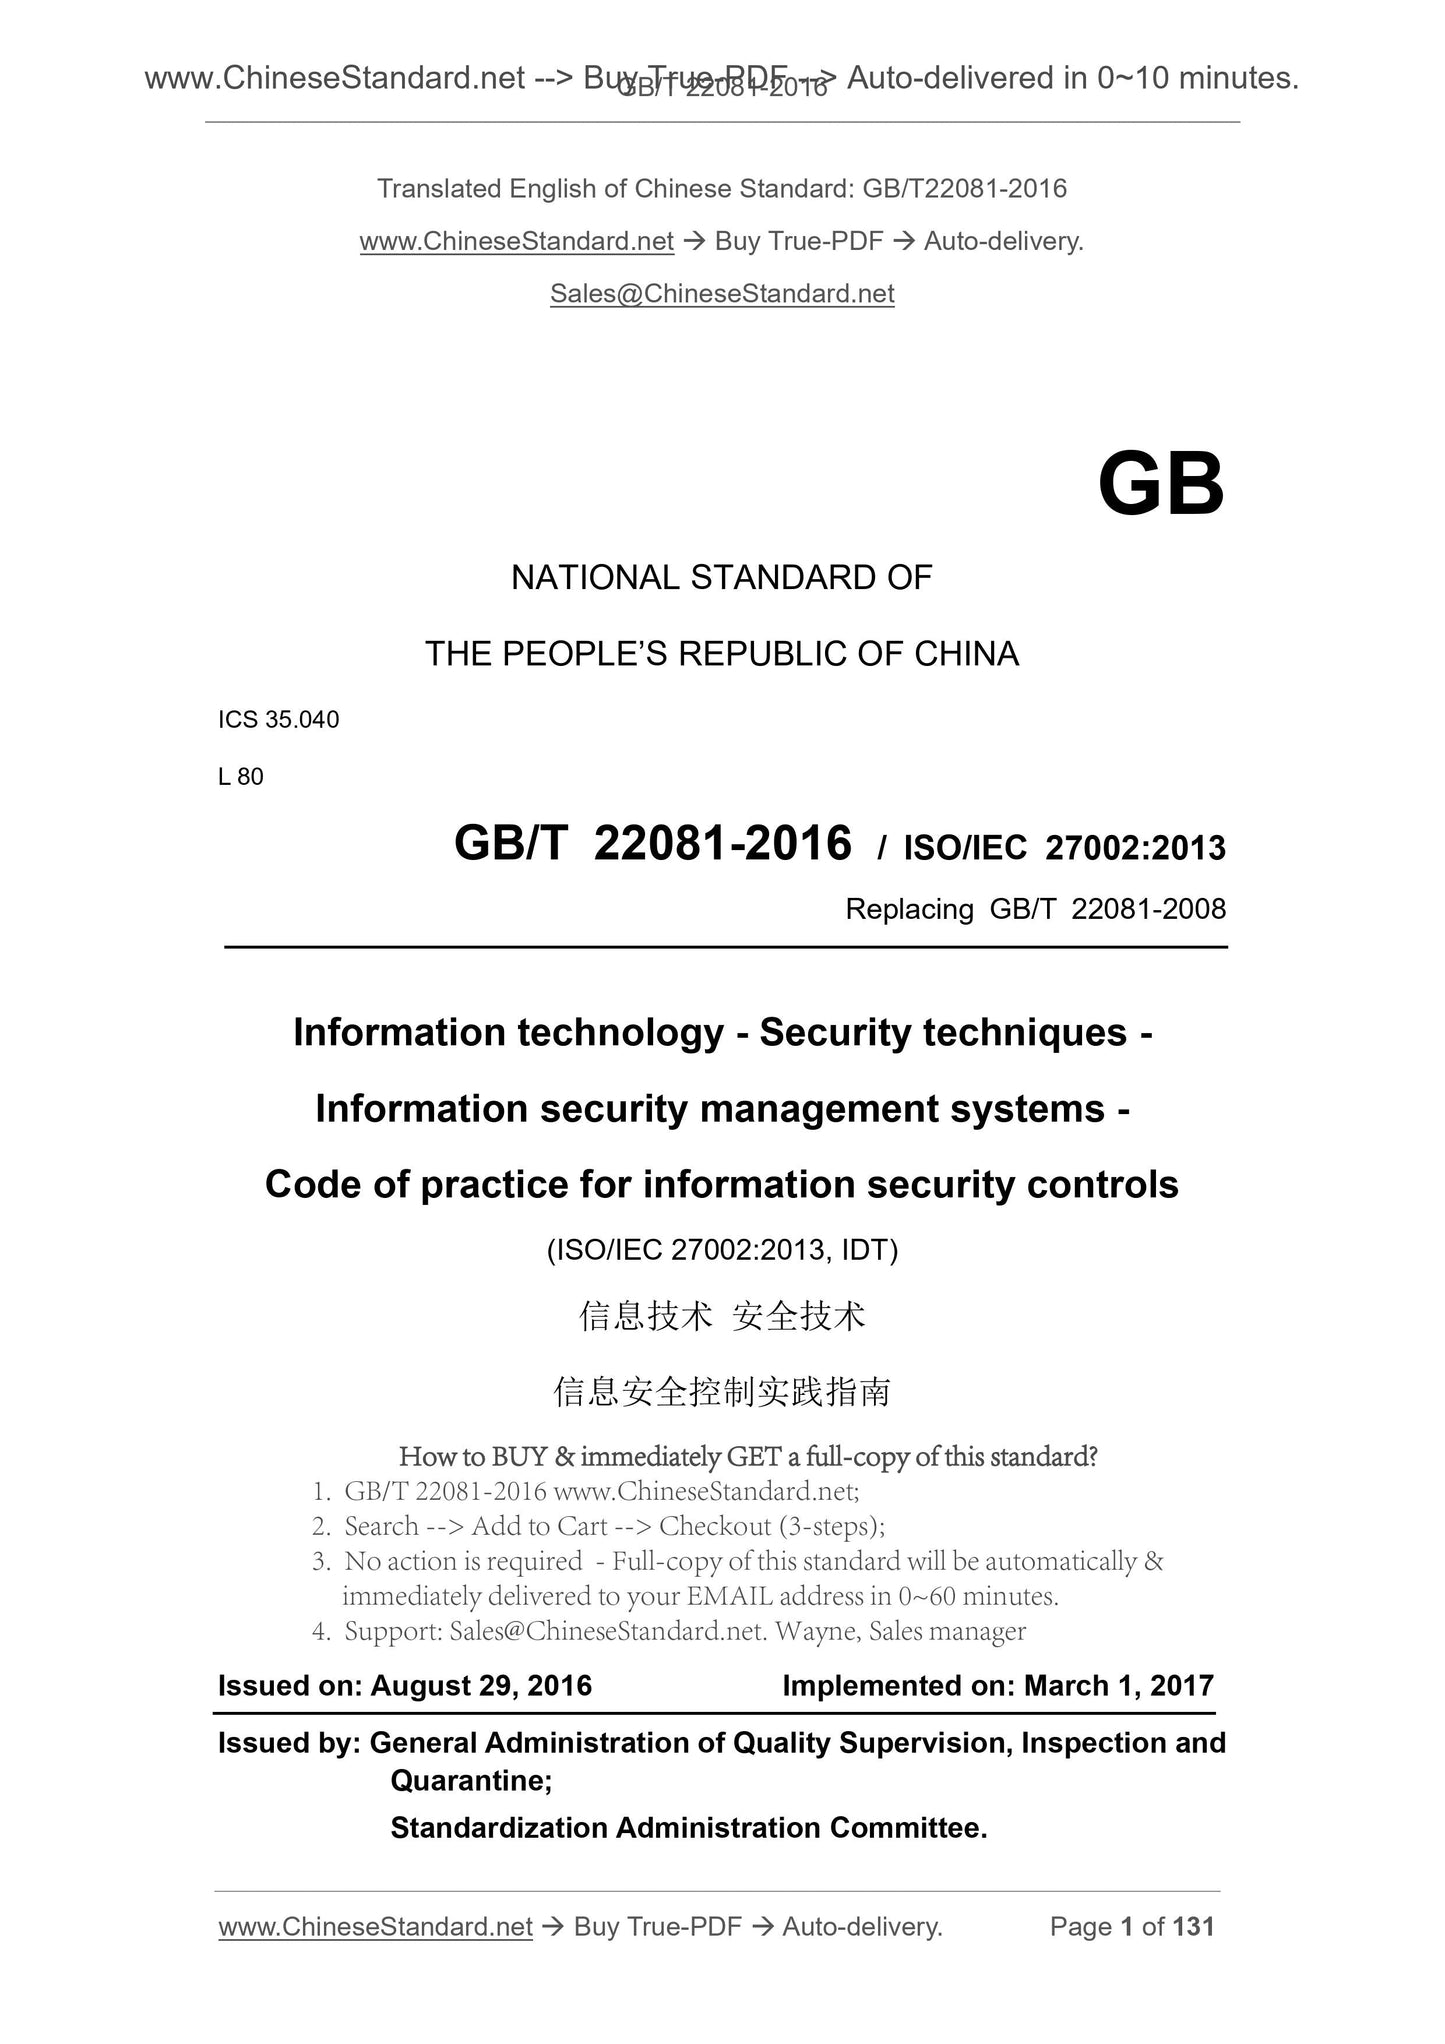 GB/T 22081-2016 Page 1